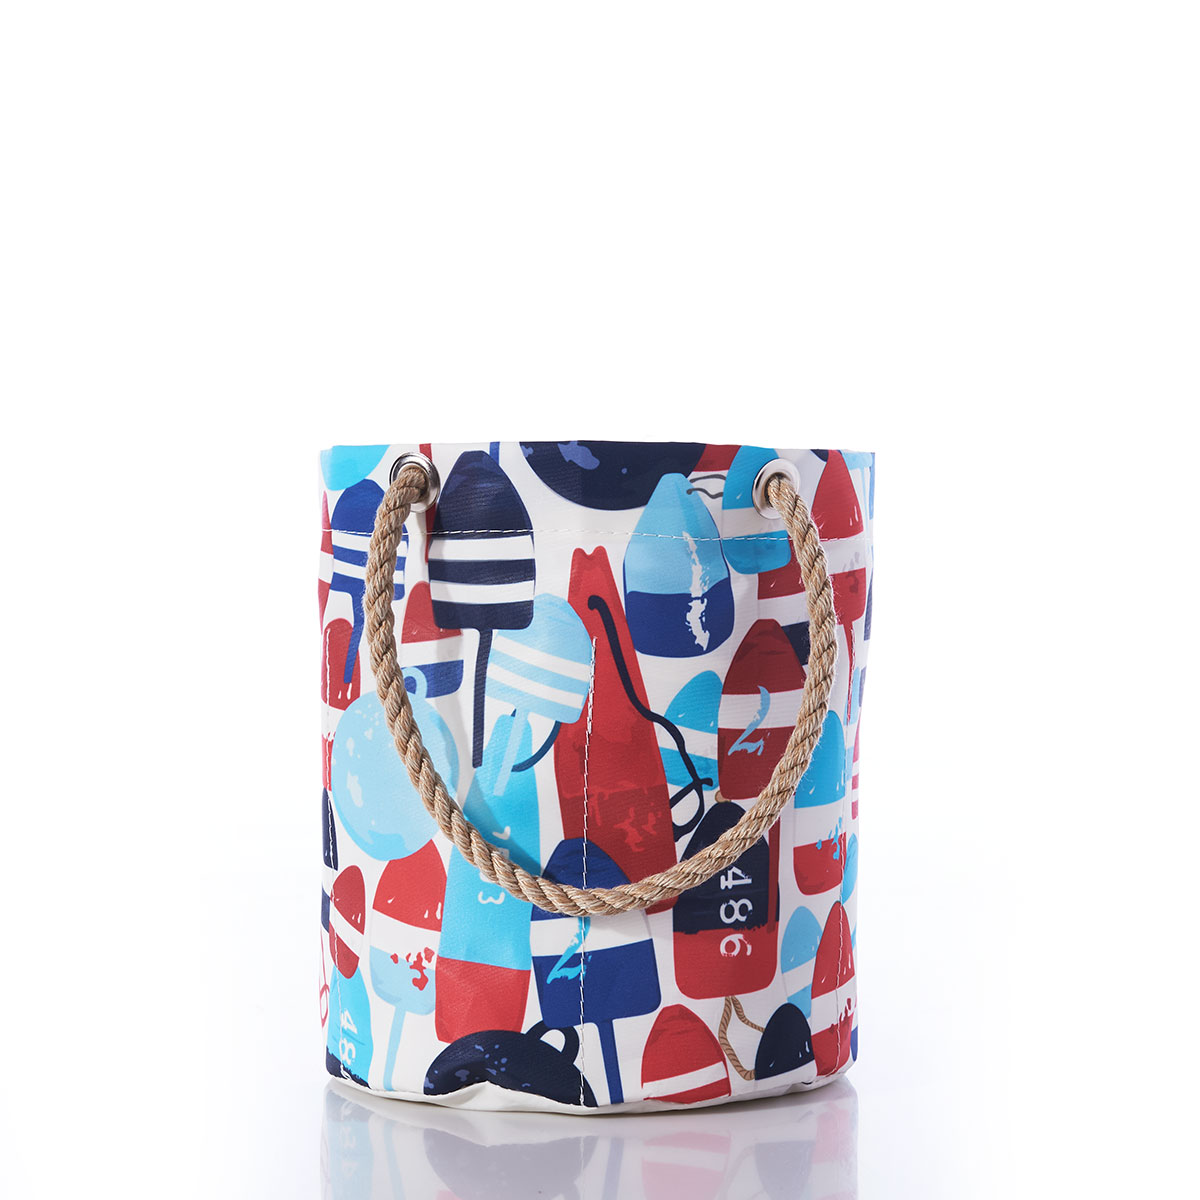 a recycled sail cloth beverage bucket bag with hemp rope handles is emblazoned with a variety of printed buoys in reds and blues in different shapes and sizes